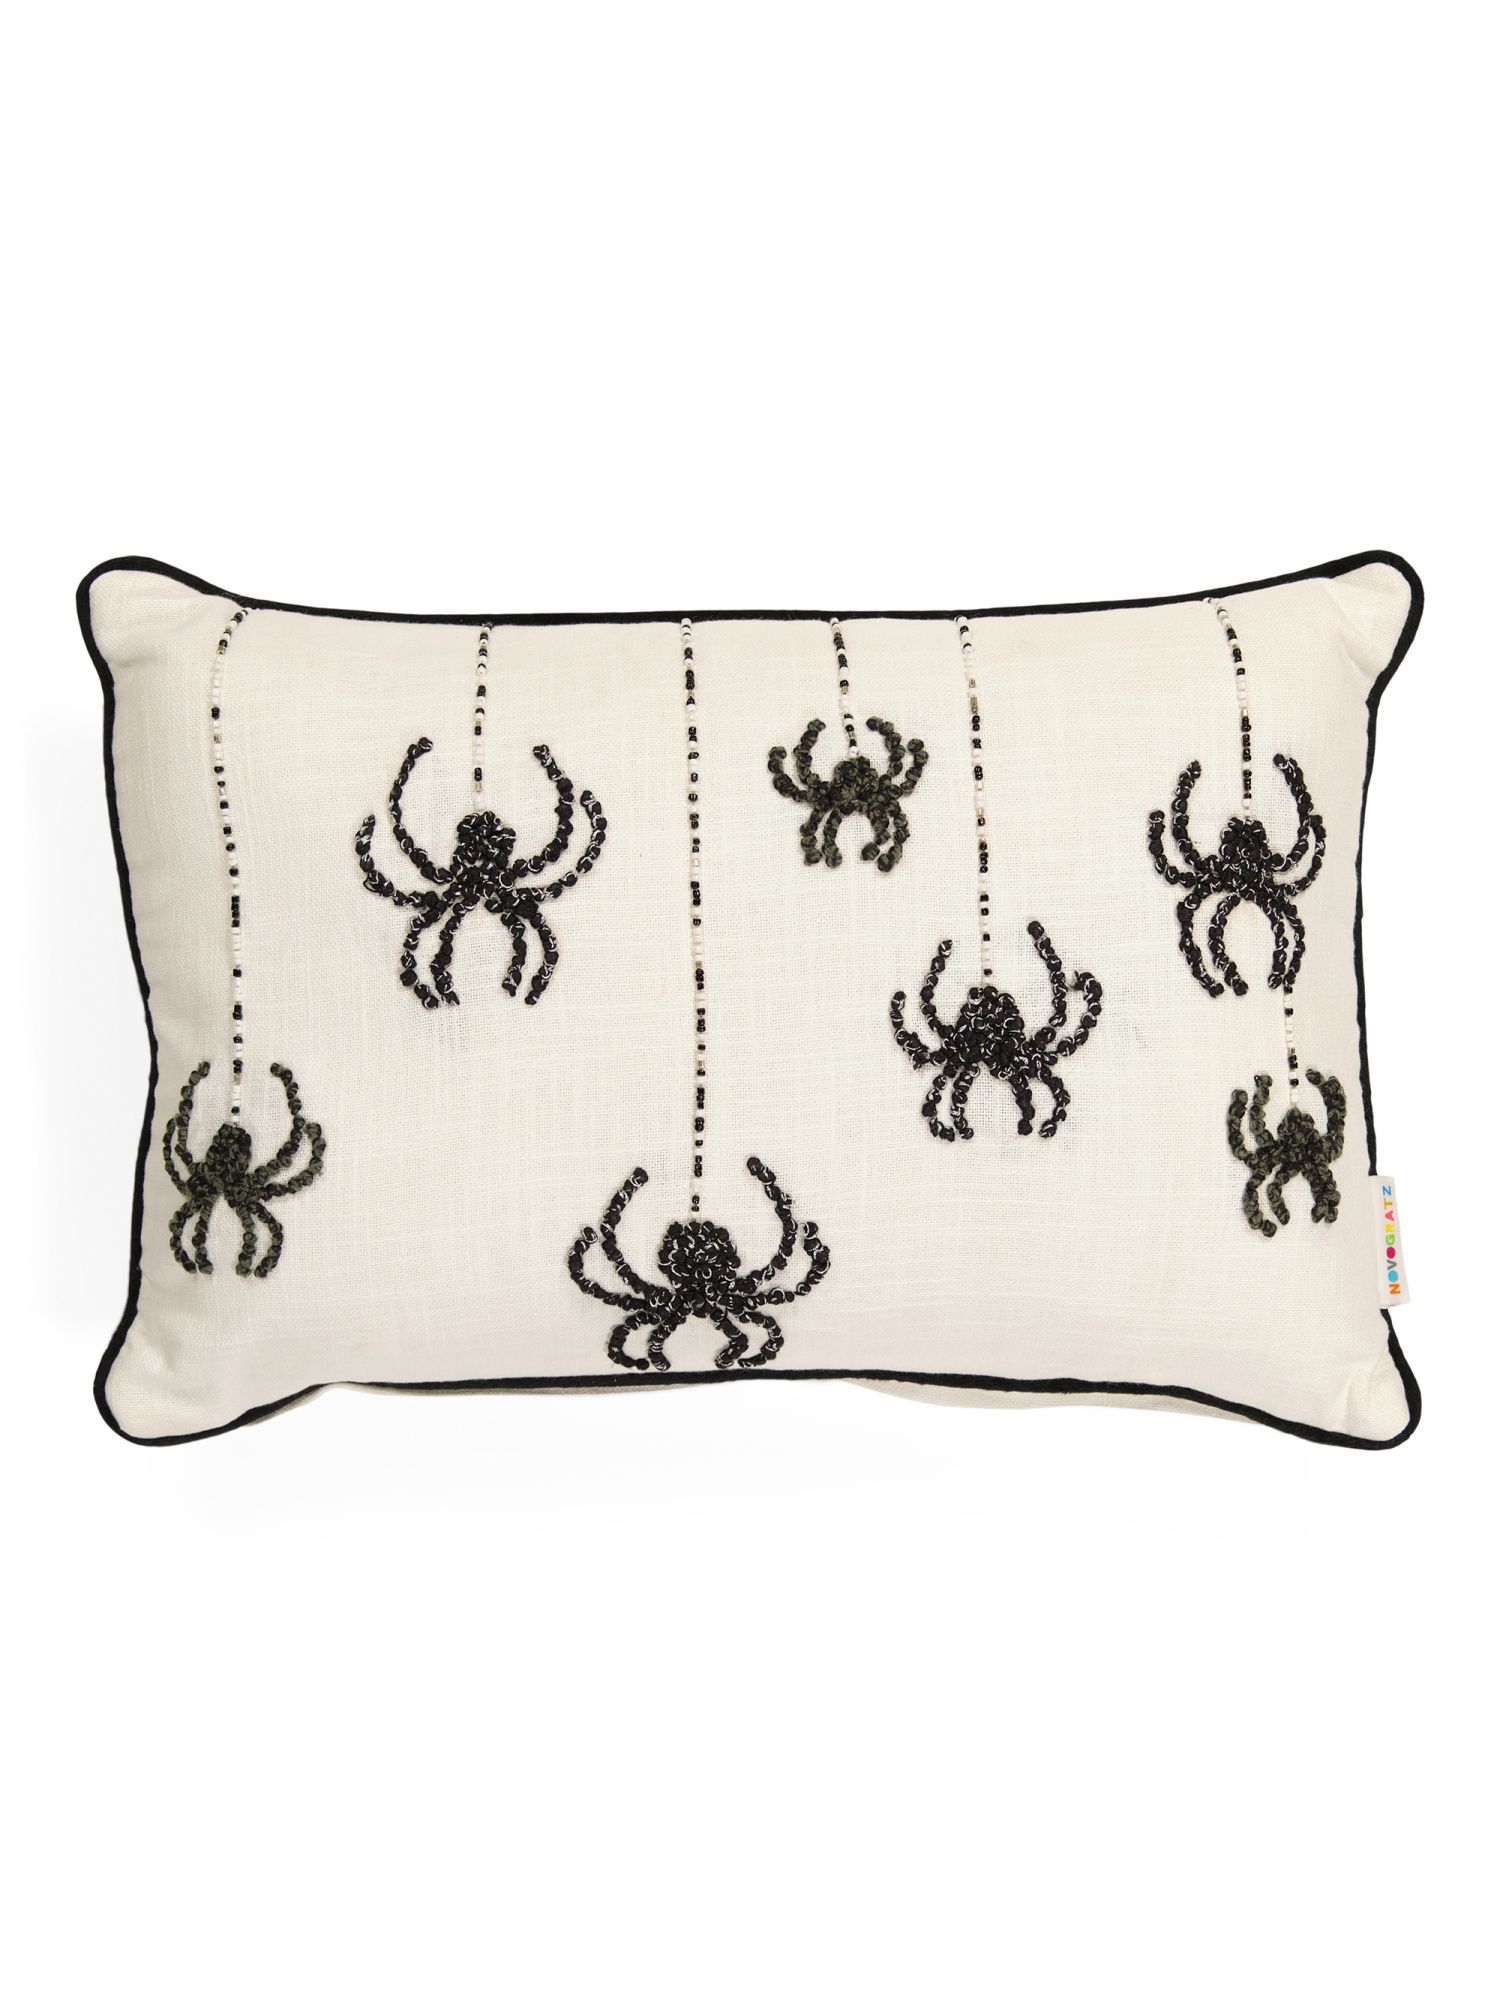 14x20 Beaded French Knot Spider Pillow | TJ Maxx